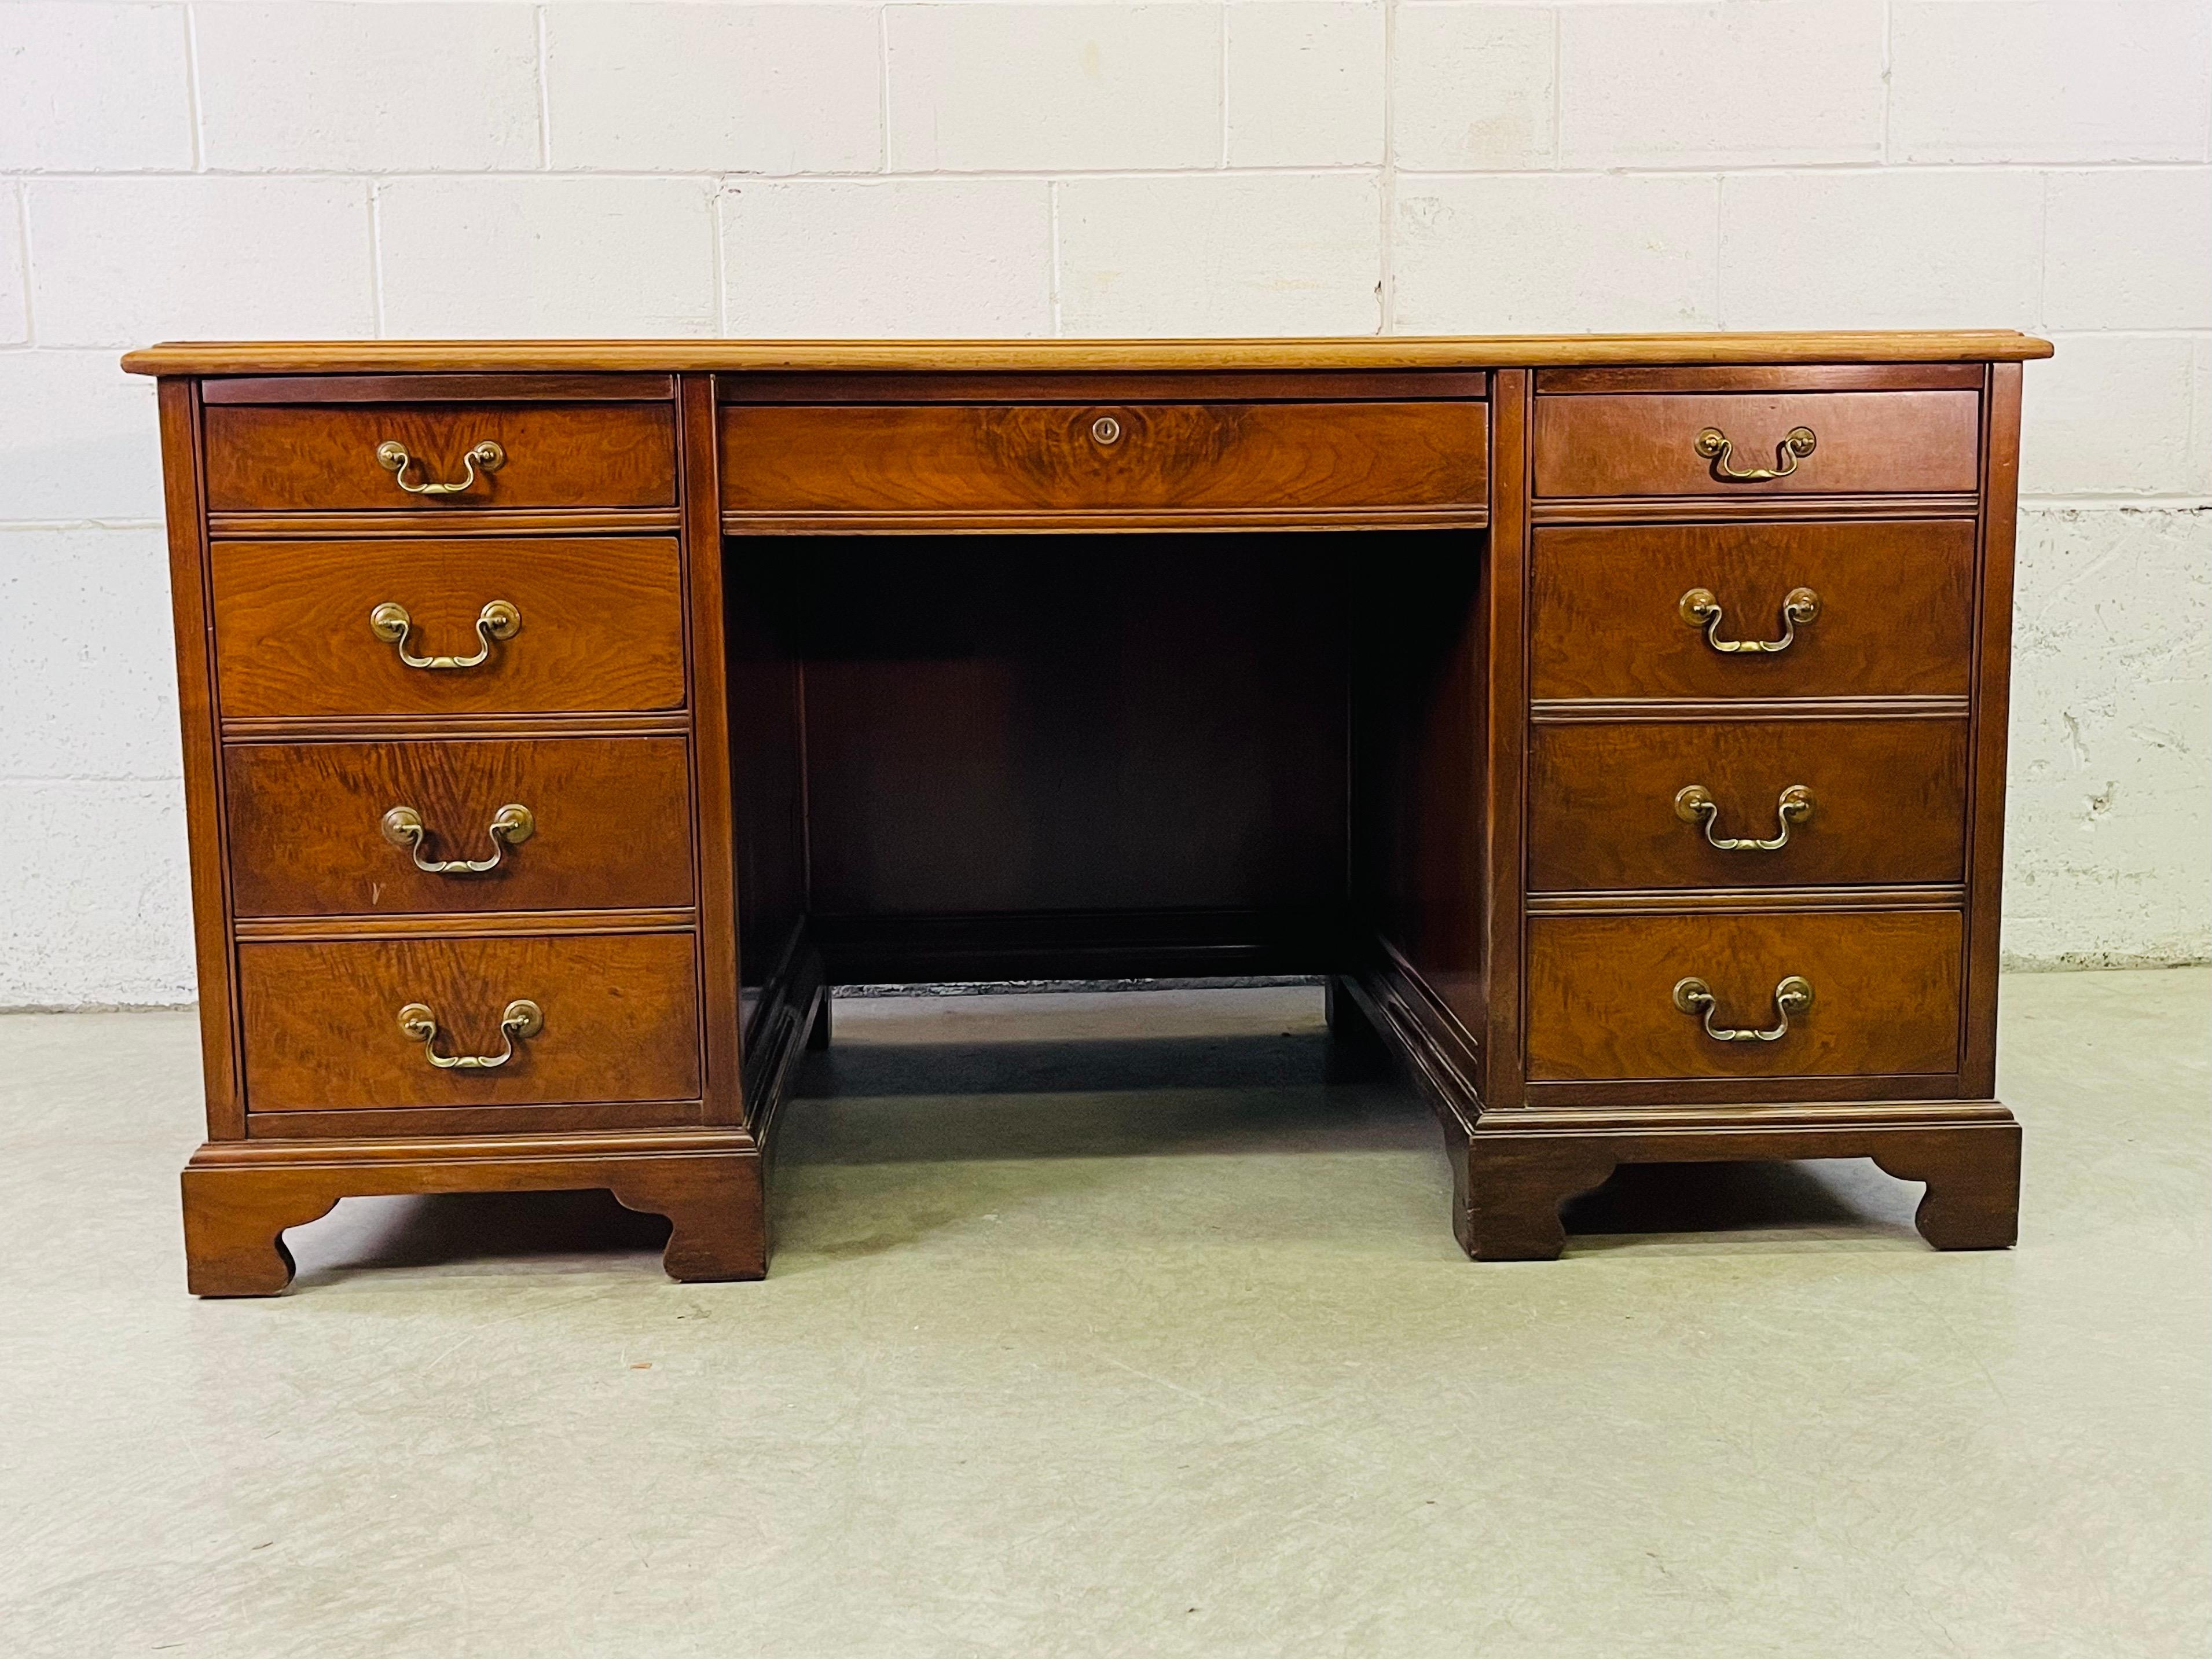 Vintage 1980s mahogany wood executive style desk. The desk has 8 drawers and two flat pull out side drawers. The back of the desk is finished. There is a opening on the top for wires to pass through. Chair clearance is 25” L x 24.5” H. Marked Jasper